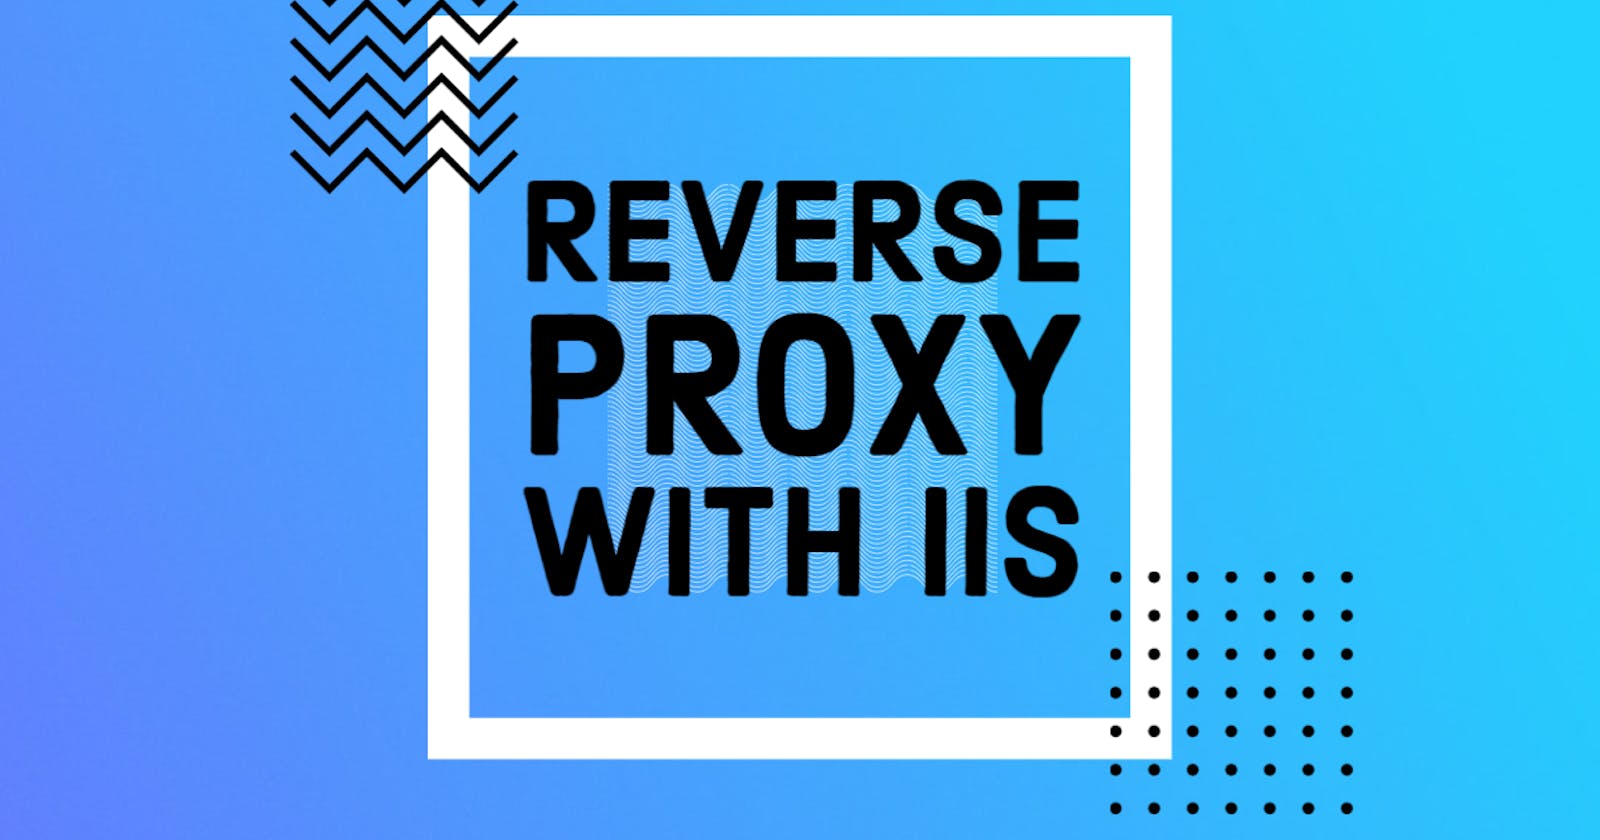 Reverse-Proxying Node.js Apps on Windows with IIS